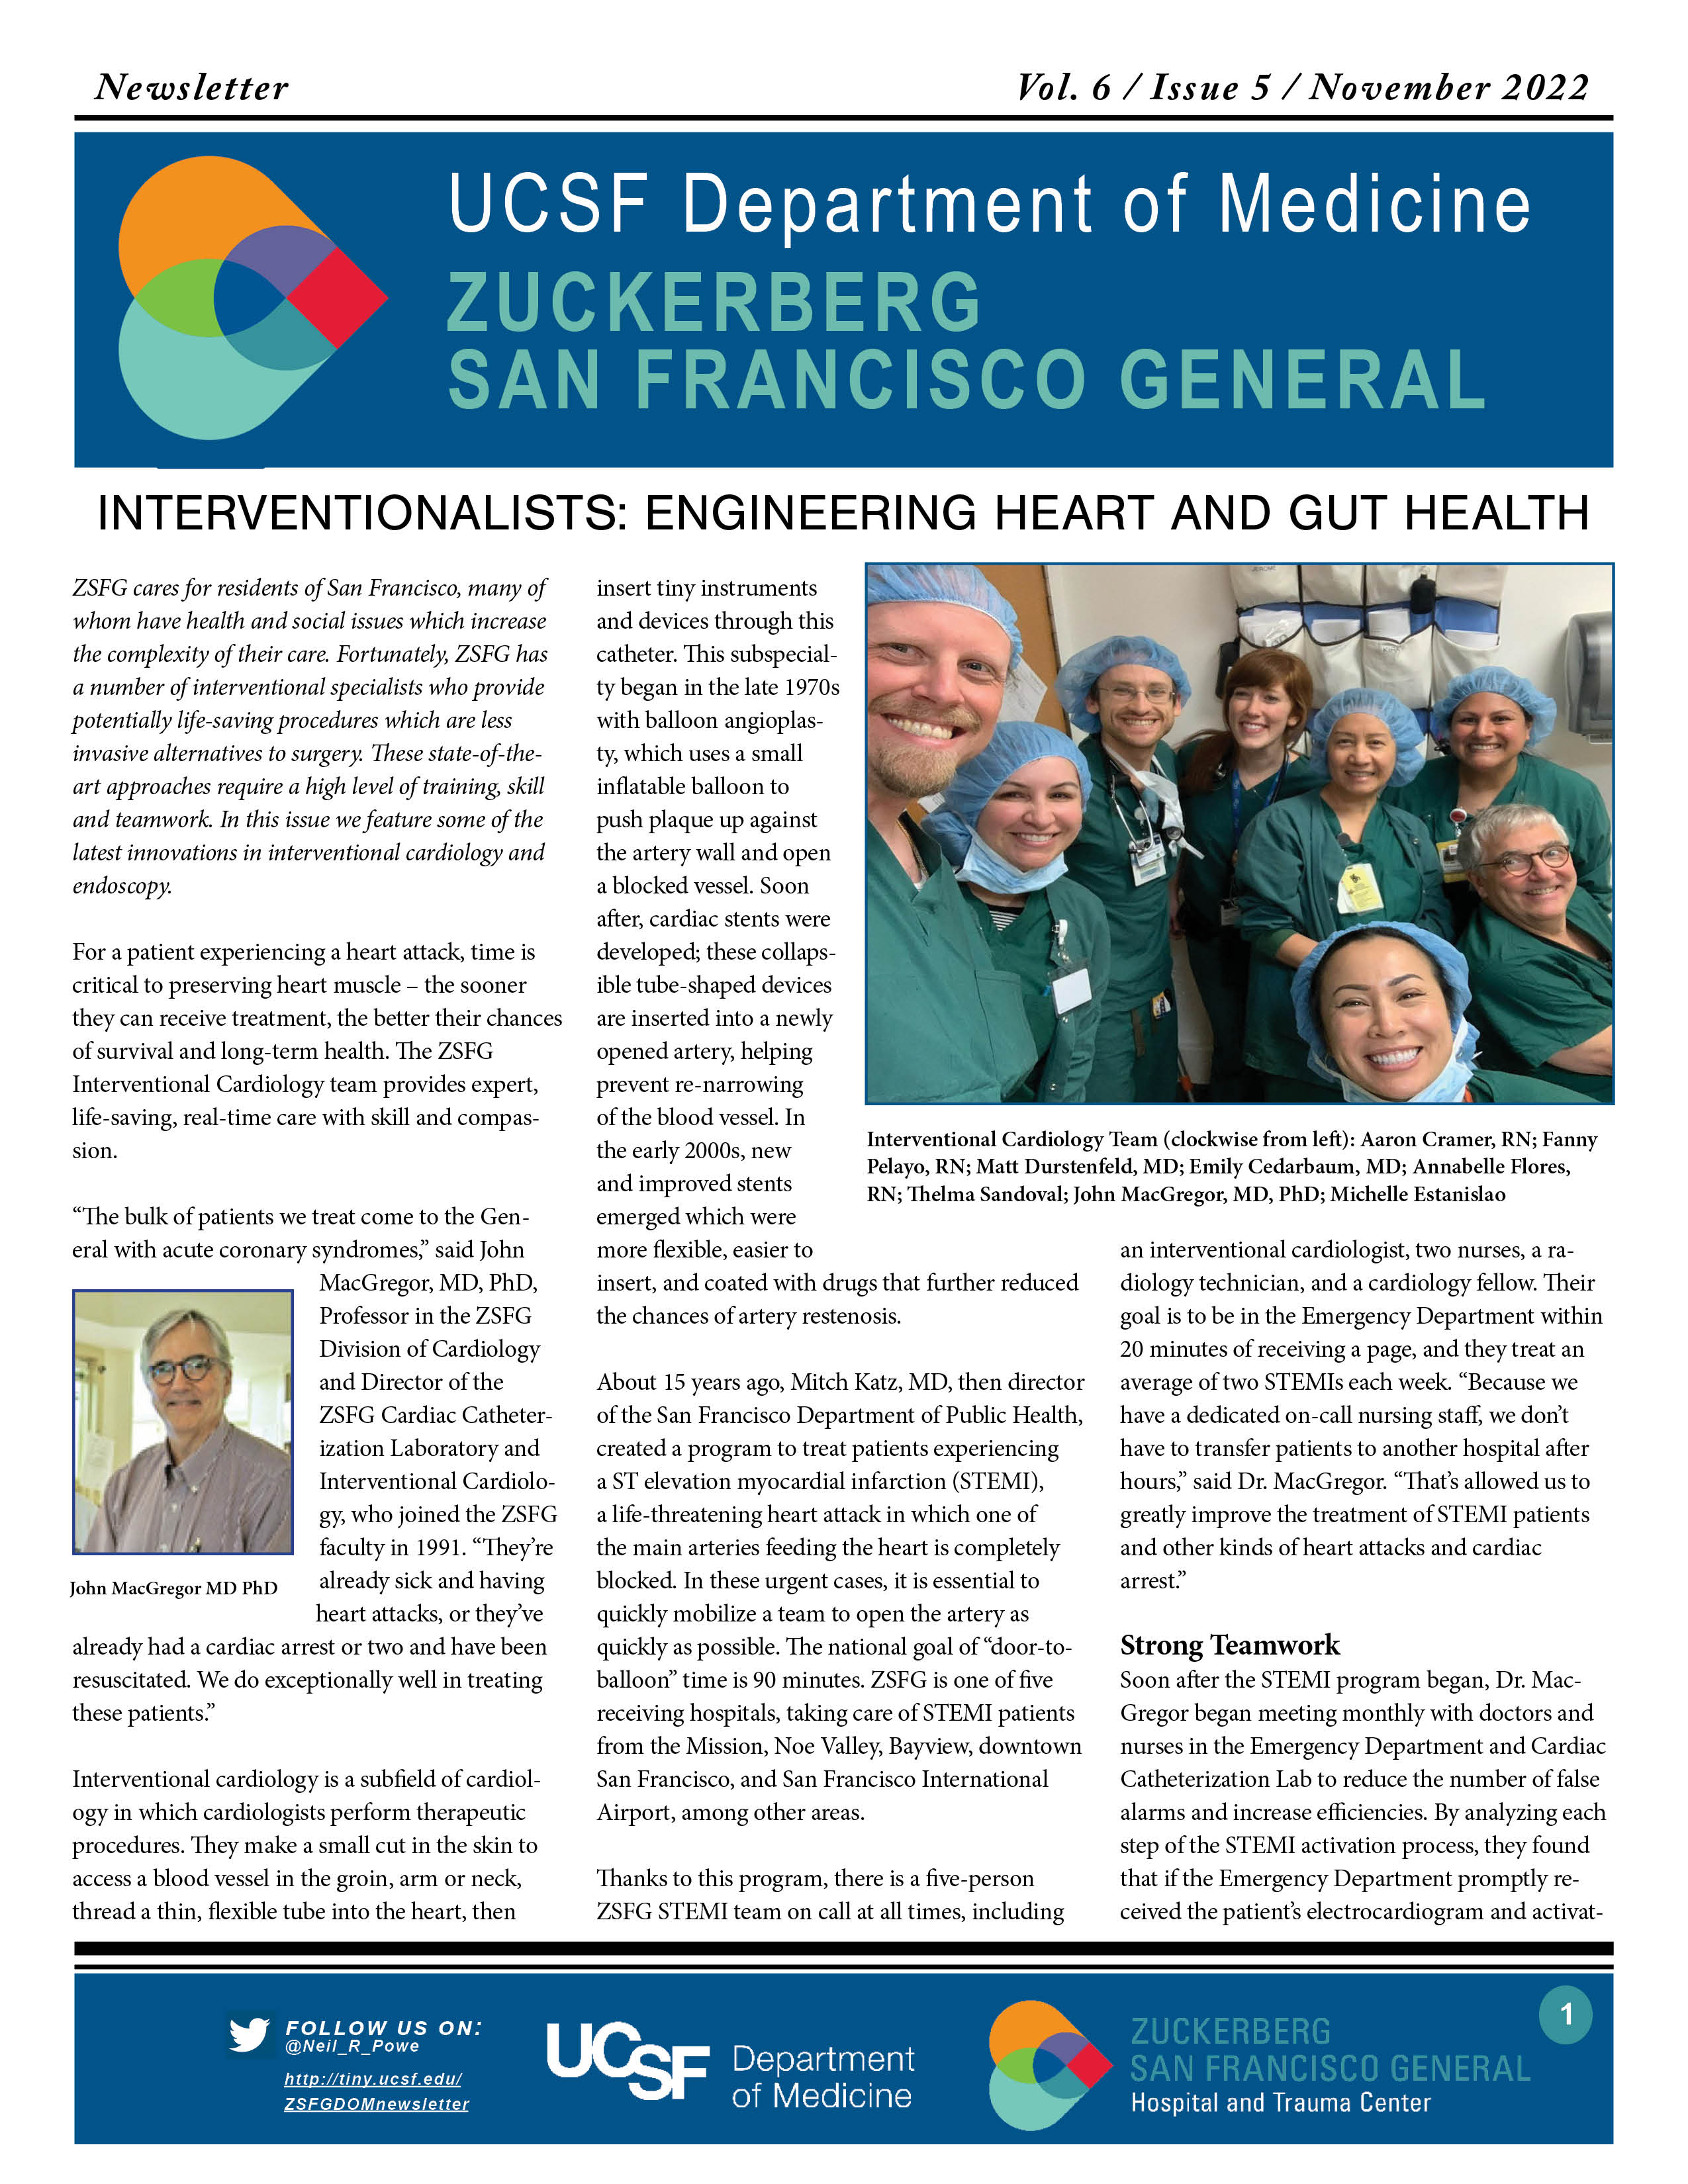 Newsletter cover with photo of cardiology team in upper right with 8 people in scrubs smiling and headshot photo of John MacGregor on left